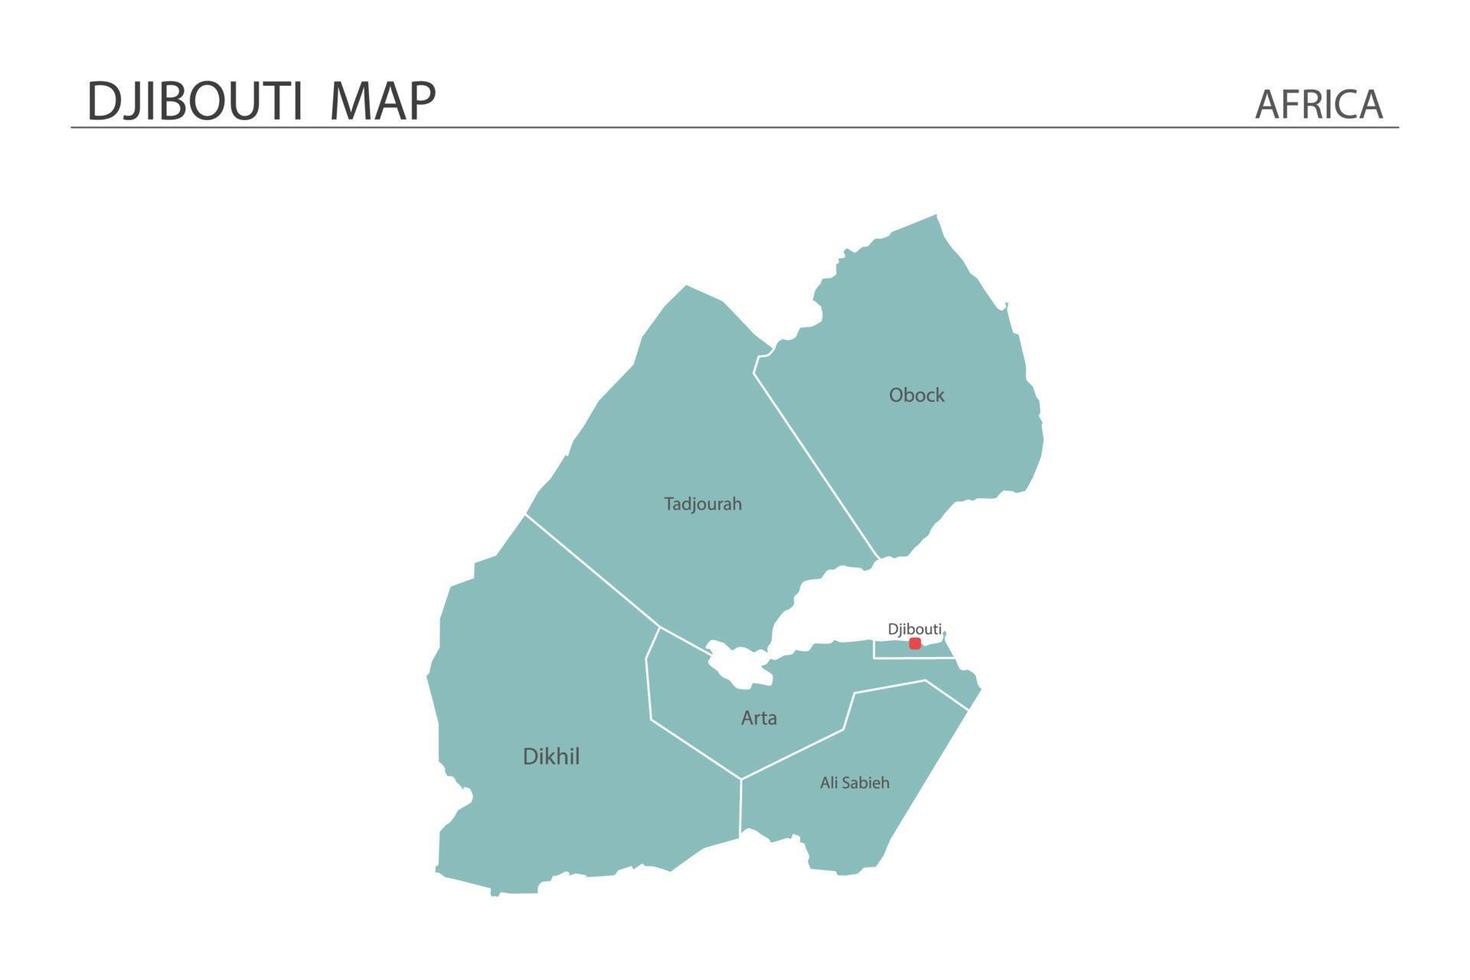 Djibouti map vector illustration on white background. Map have all province and mark the capital city of Djibouti.